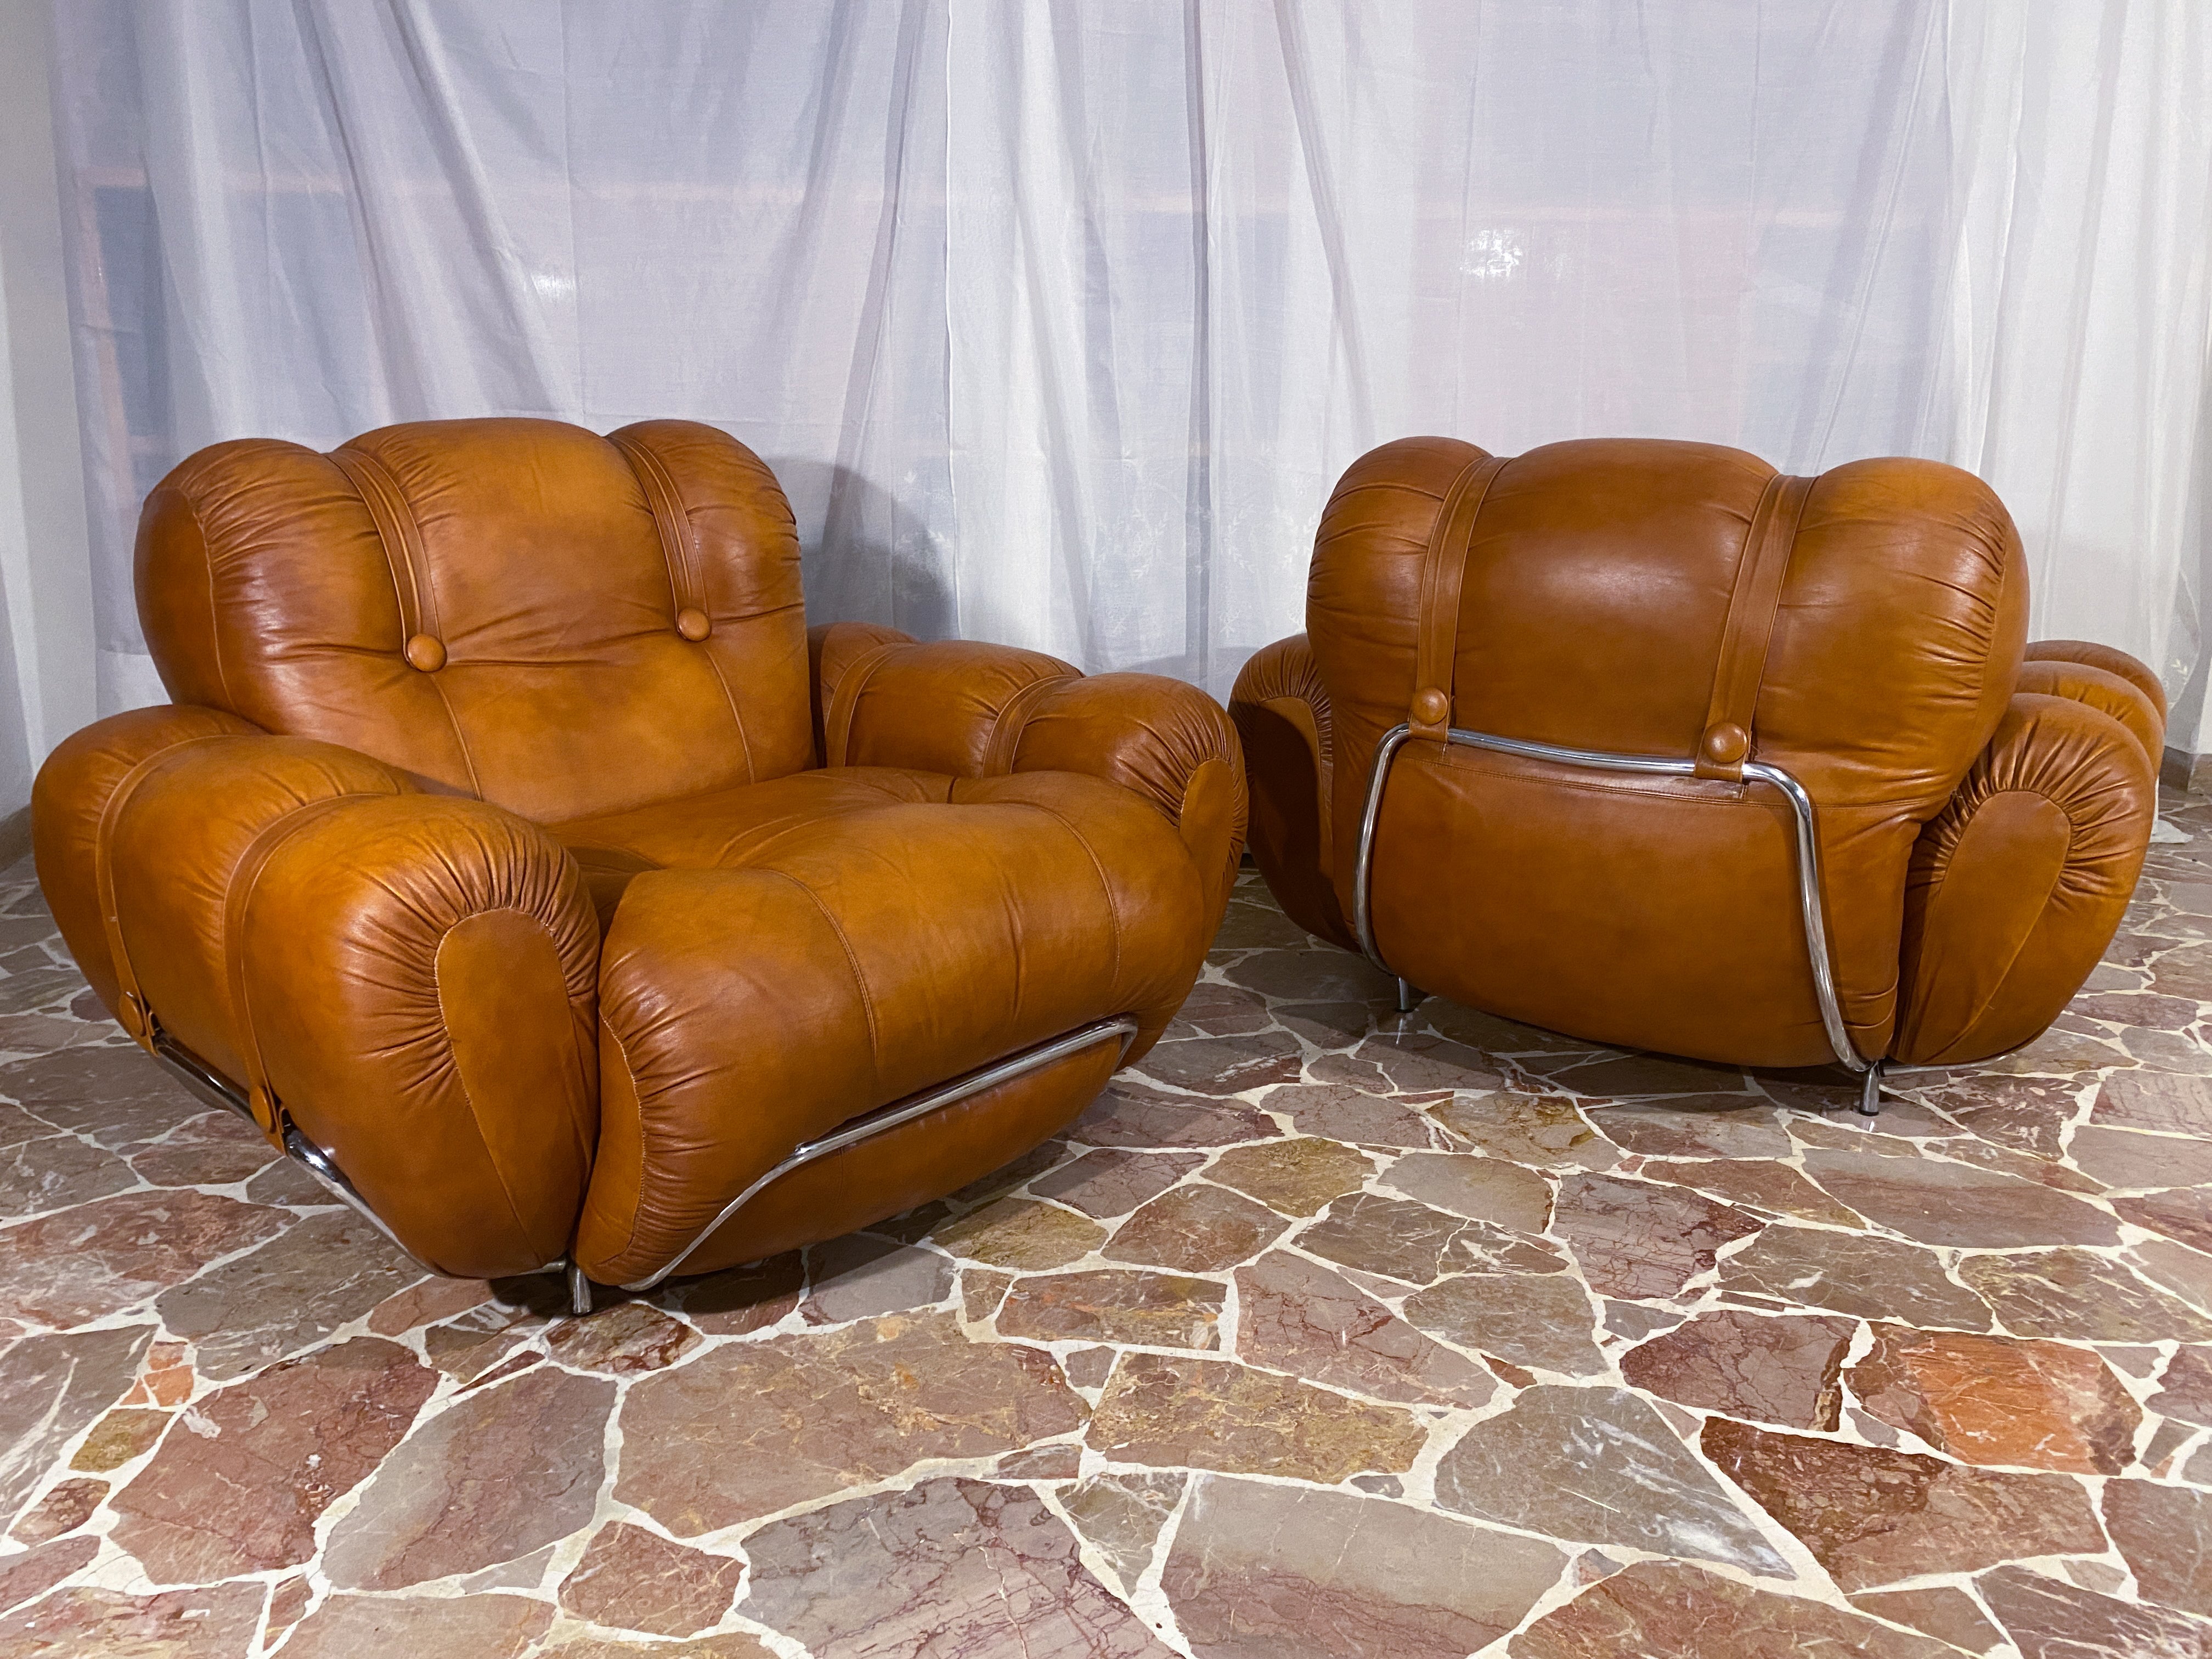 A stunning pair of armchairs made in Italy in the 1970s. The seat is very comfortable and supportive. The pads are still original and in very good condition. Original natural leather upholstery in very good condition from the period, a skilled